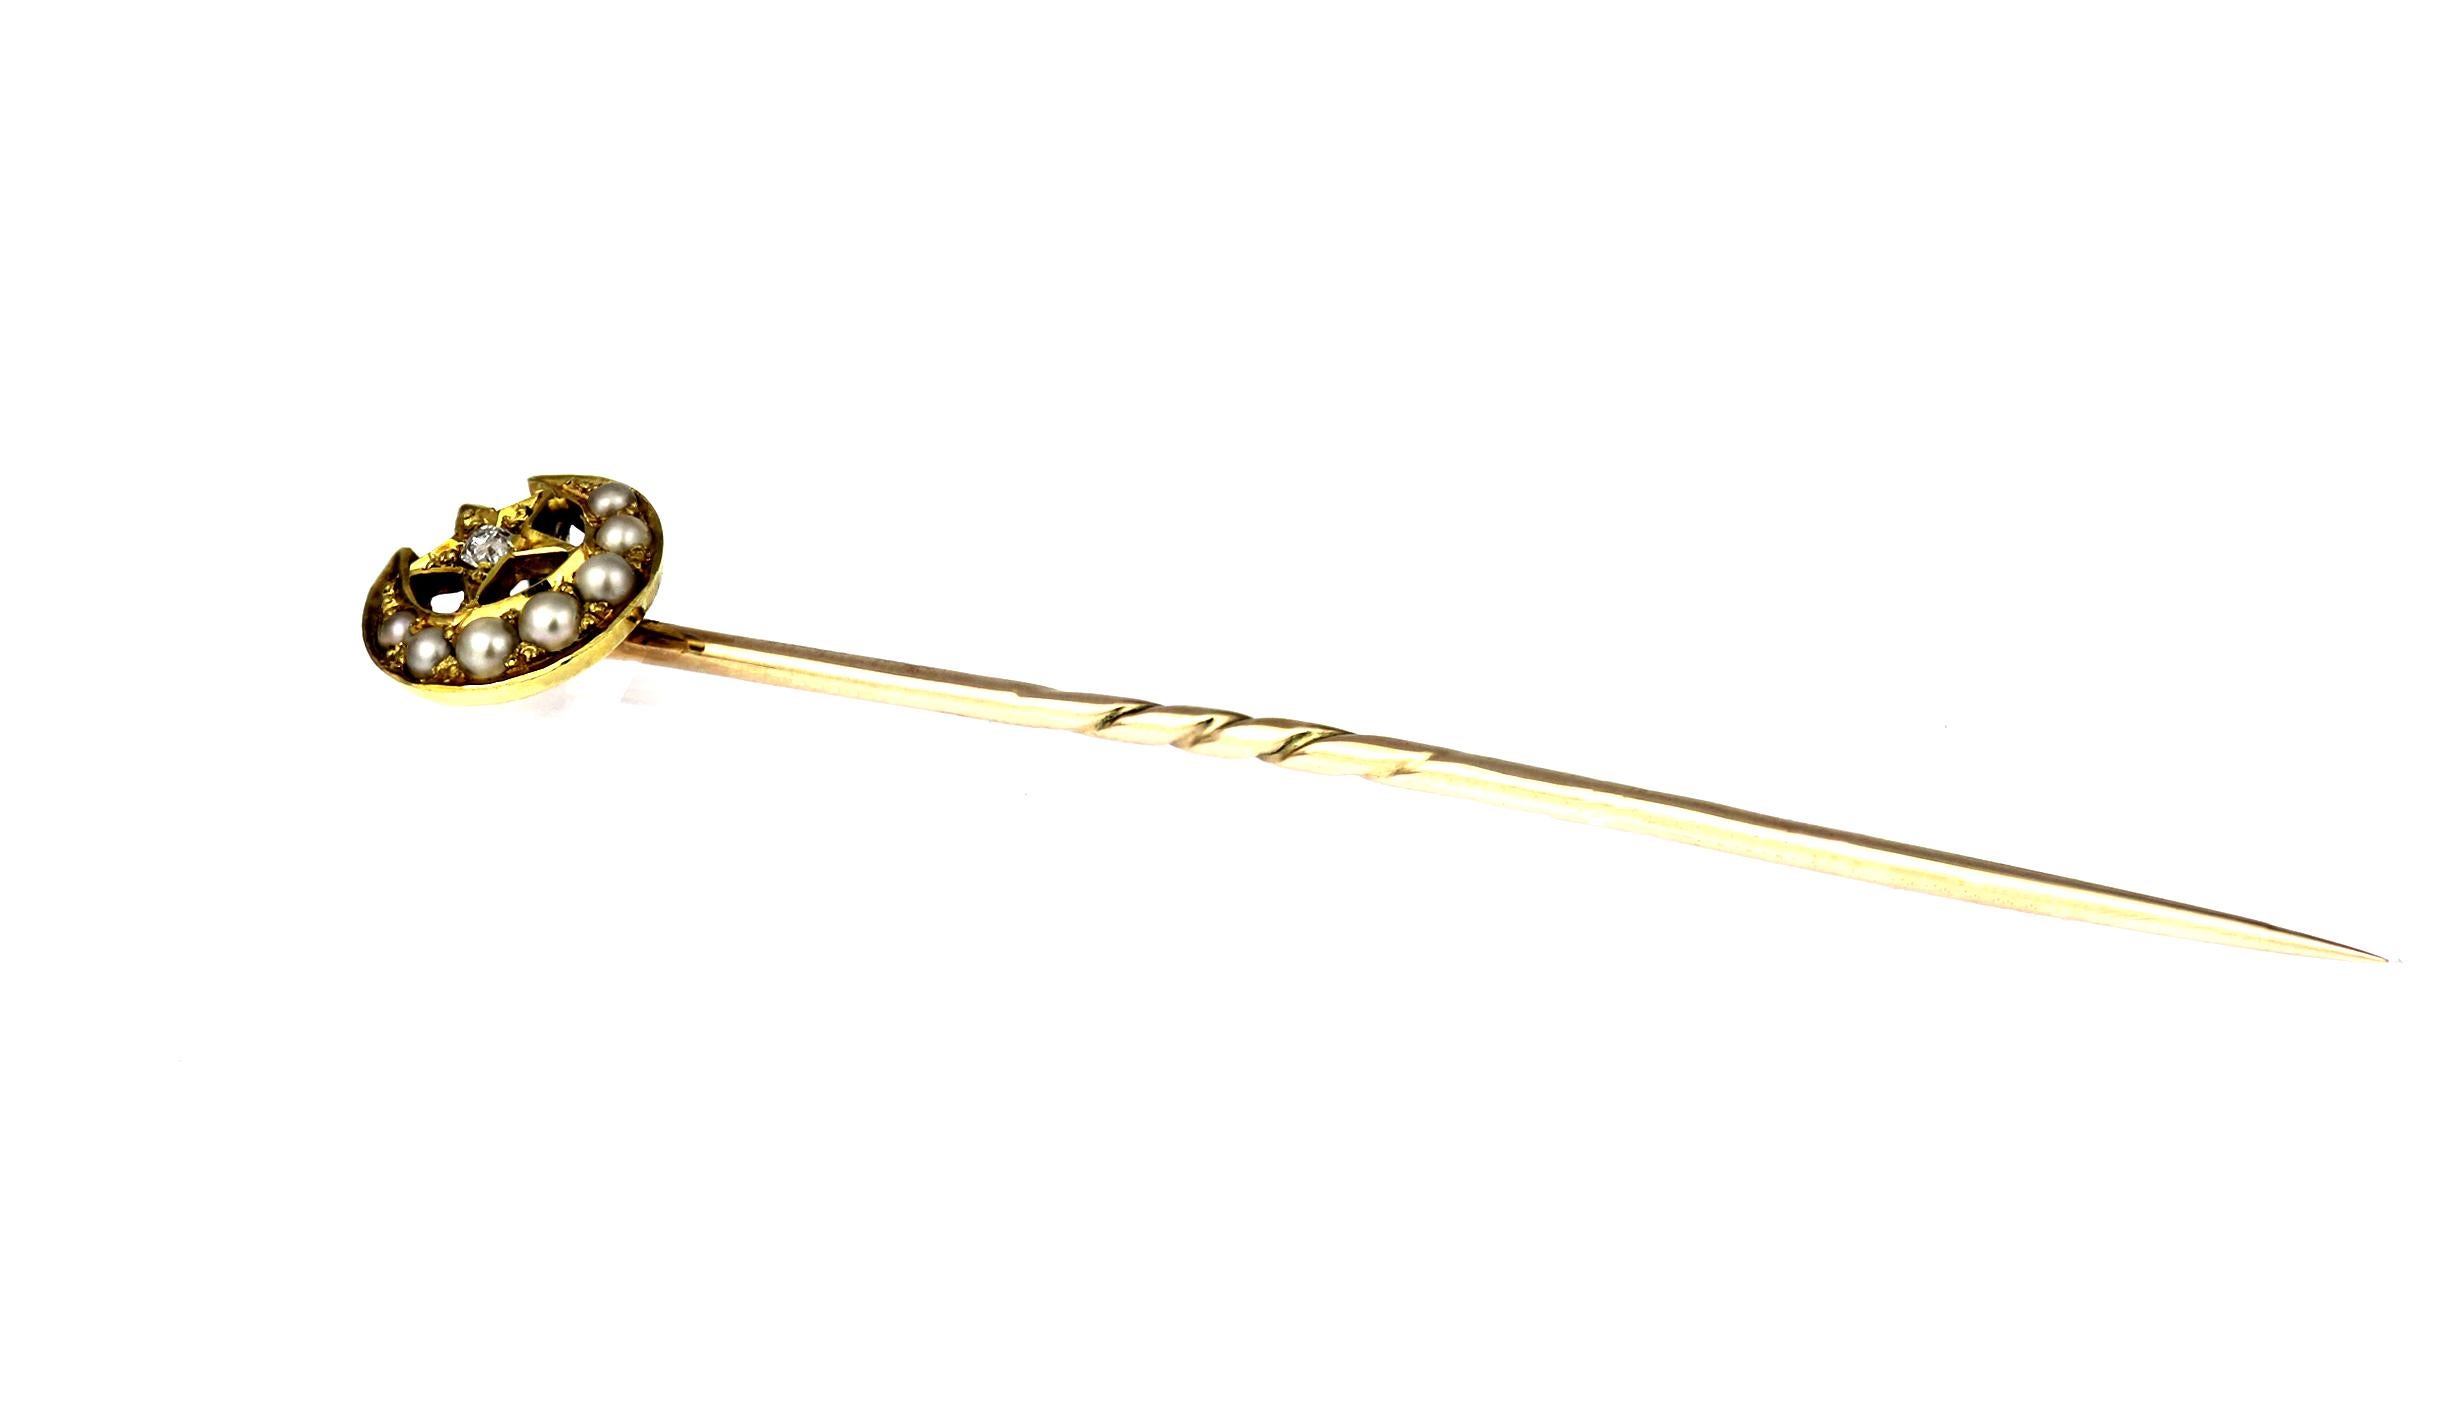 Antique, Victorian natural pearl and diamond Crescent Moon and Star tie pin set in 15-carat yellow gold. Circa 1880.
1 x Old cut diamond, approximate weight 0.02 carats
Pinhead width 8.2 mm x Length 8.1 mm
Length of pin 5.6 cm

Stick Pins have been